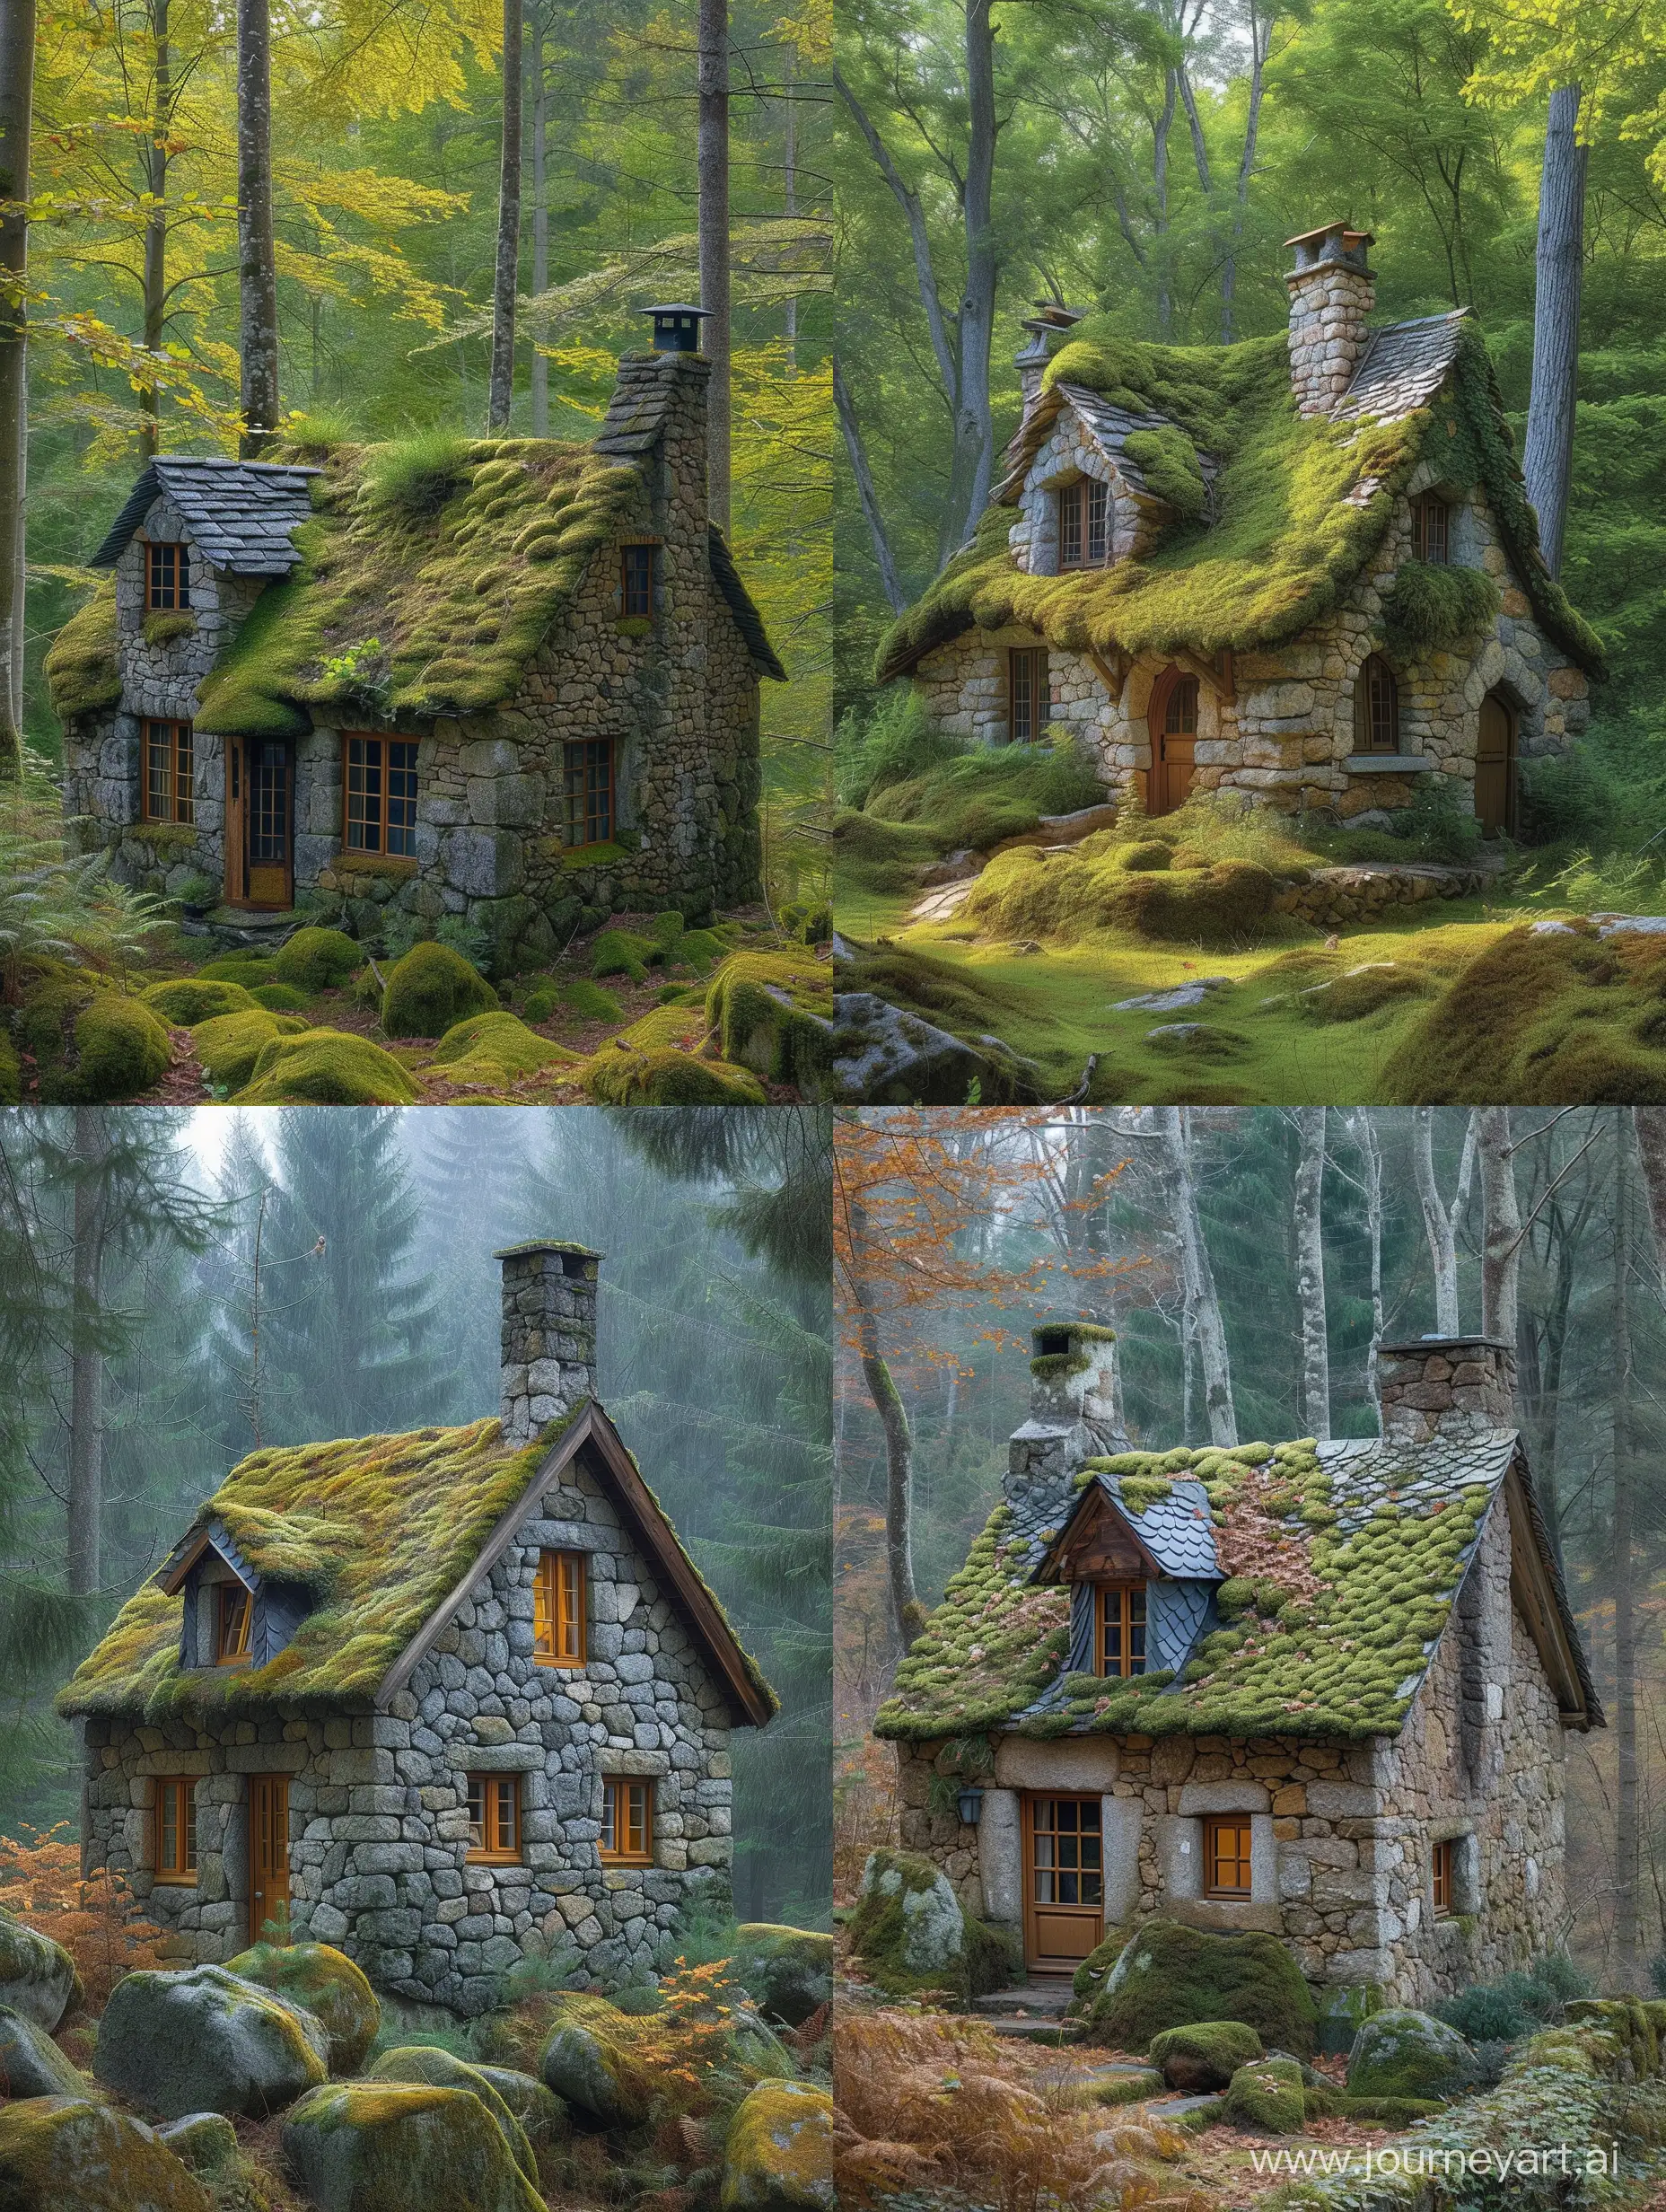 A small, cozy stone cottage with a moss-covered roof, nestled among towering trees in a lush forest --s 600